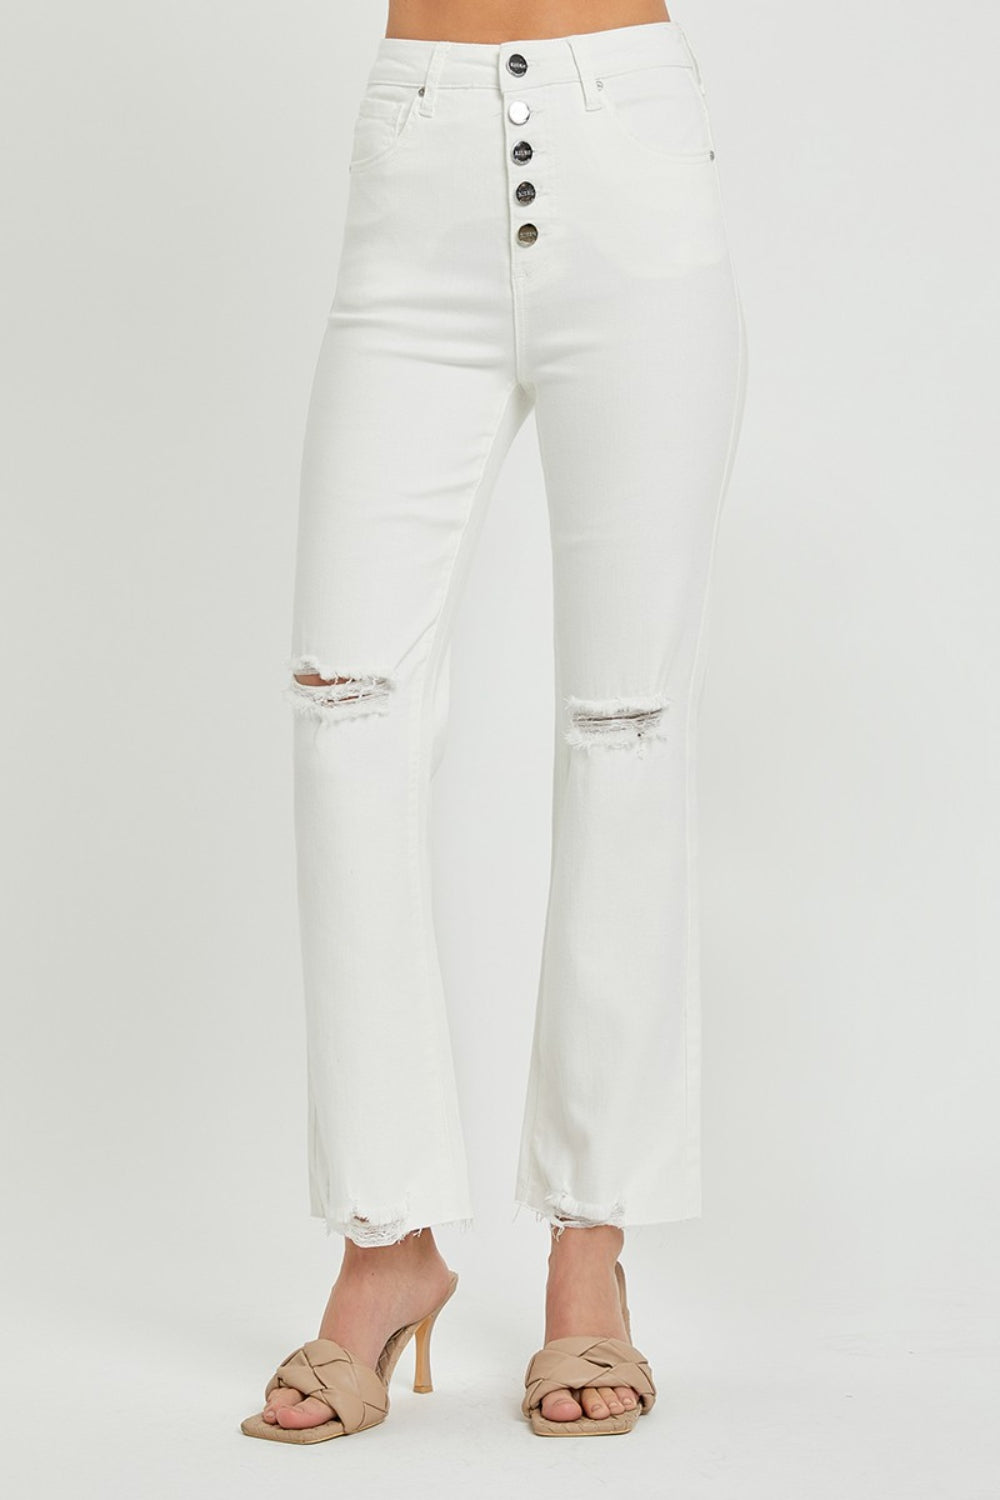 Distressed white jeans with a high waist and button fly design.